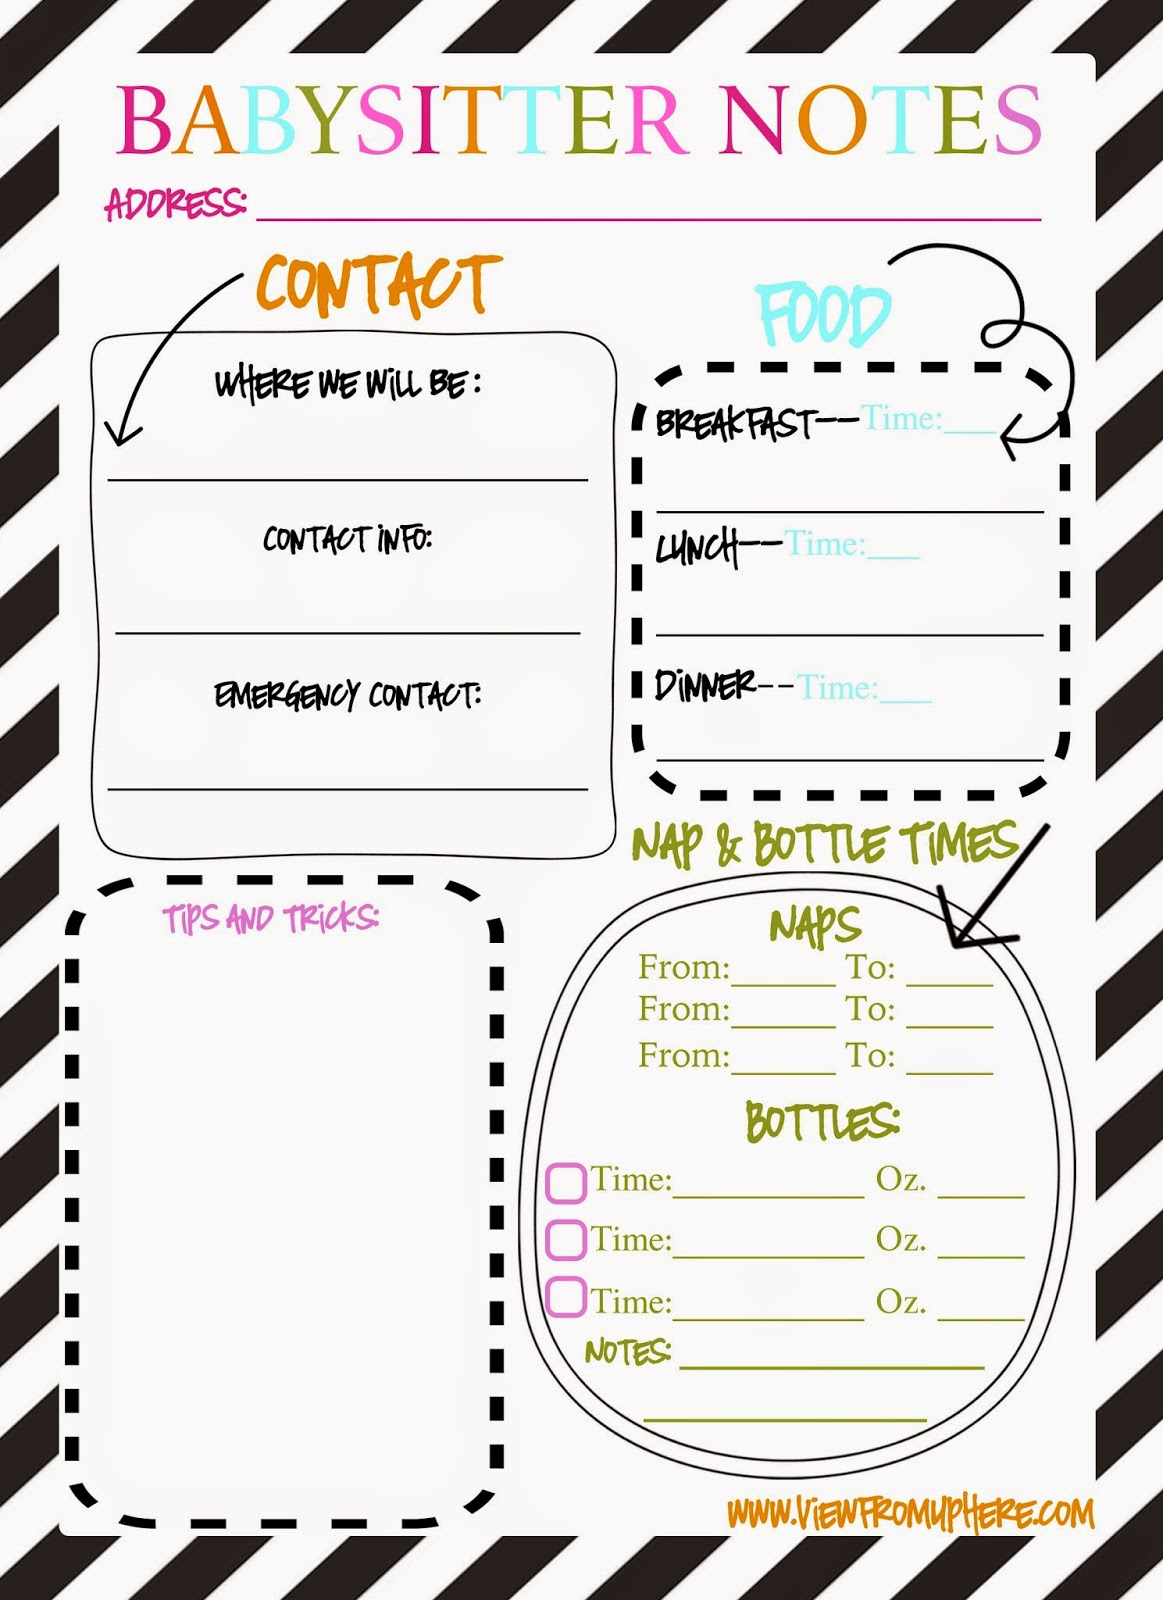 Babysitter Notes--Printable | The View From Up Here - Babysitter Notes Free Printable